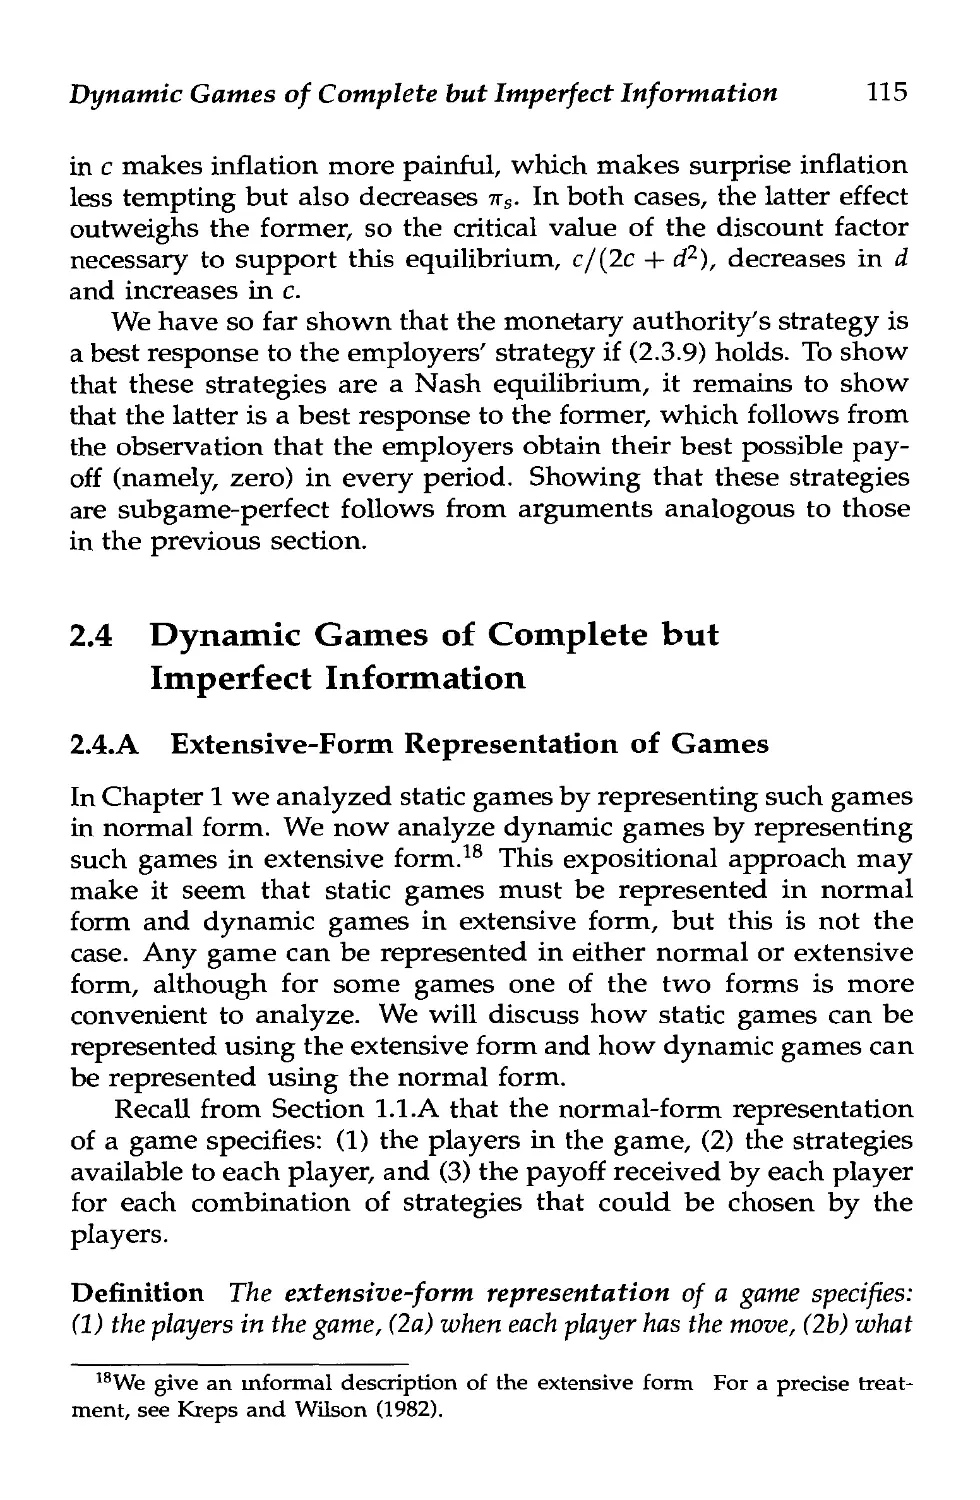 2.4 Dynamic Games of Complete but Imperfect Information